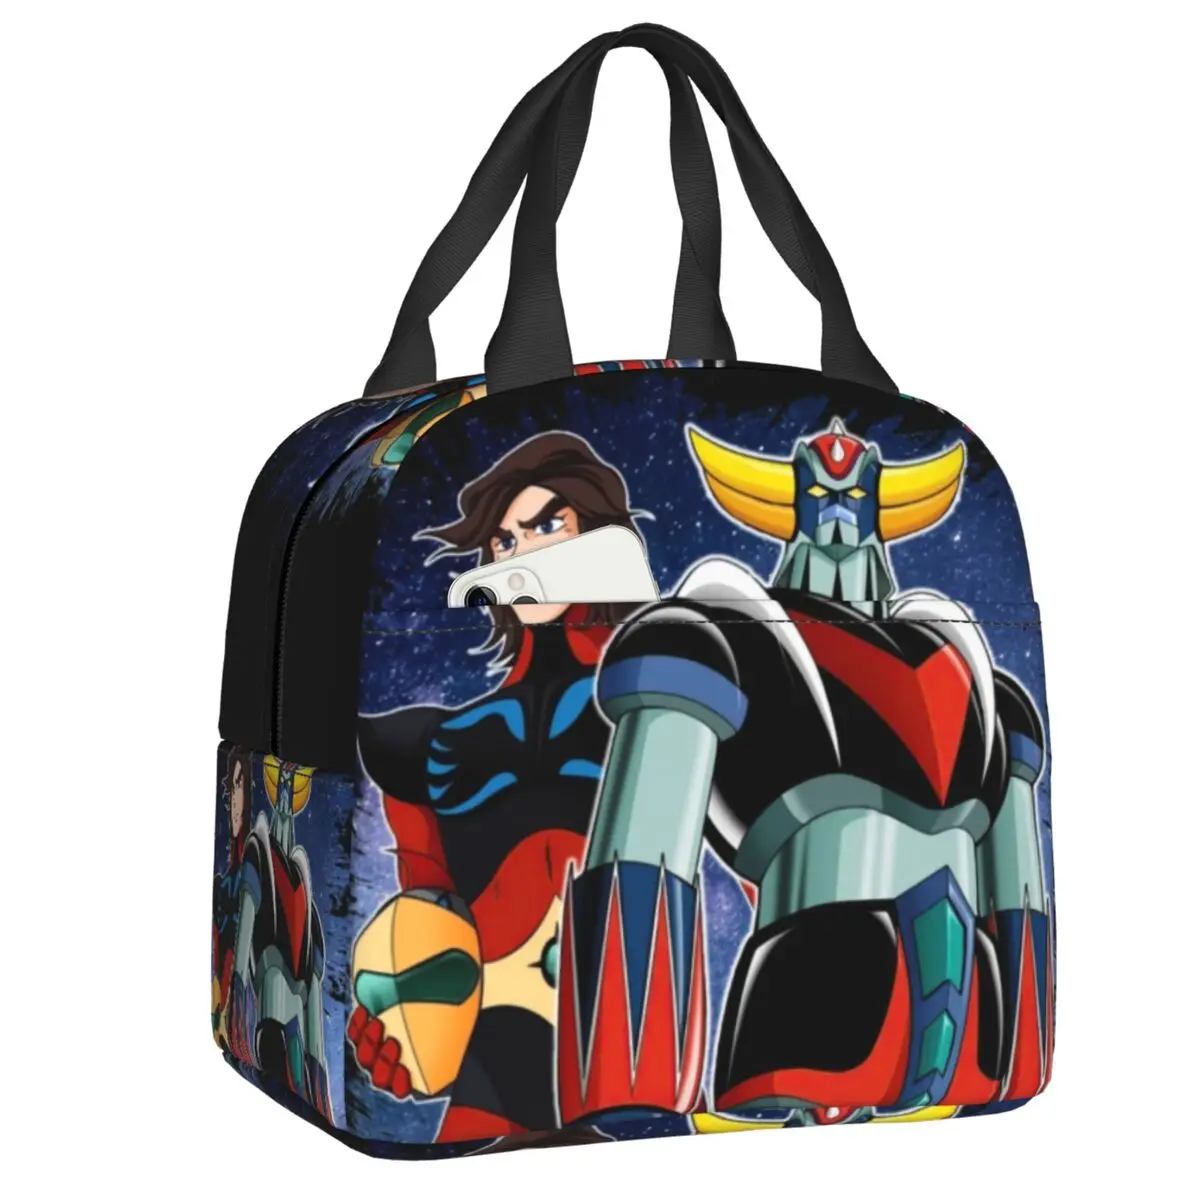 

Goldorak Grendizer Actarus Thermal Insulated Lunch Bag Women UFO Robot Goldrake Lunch Tote for Outdoor Picnic Food Box